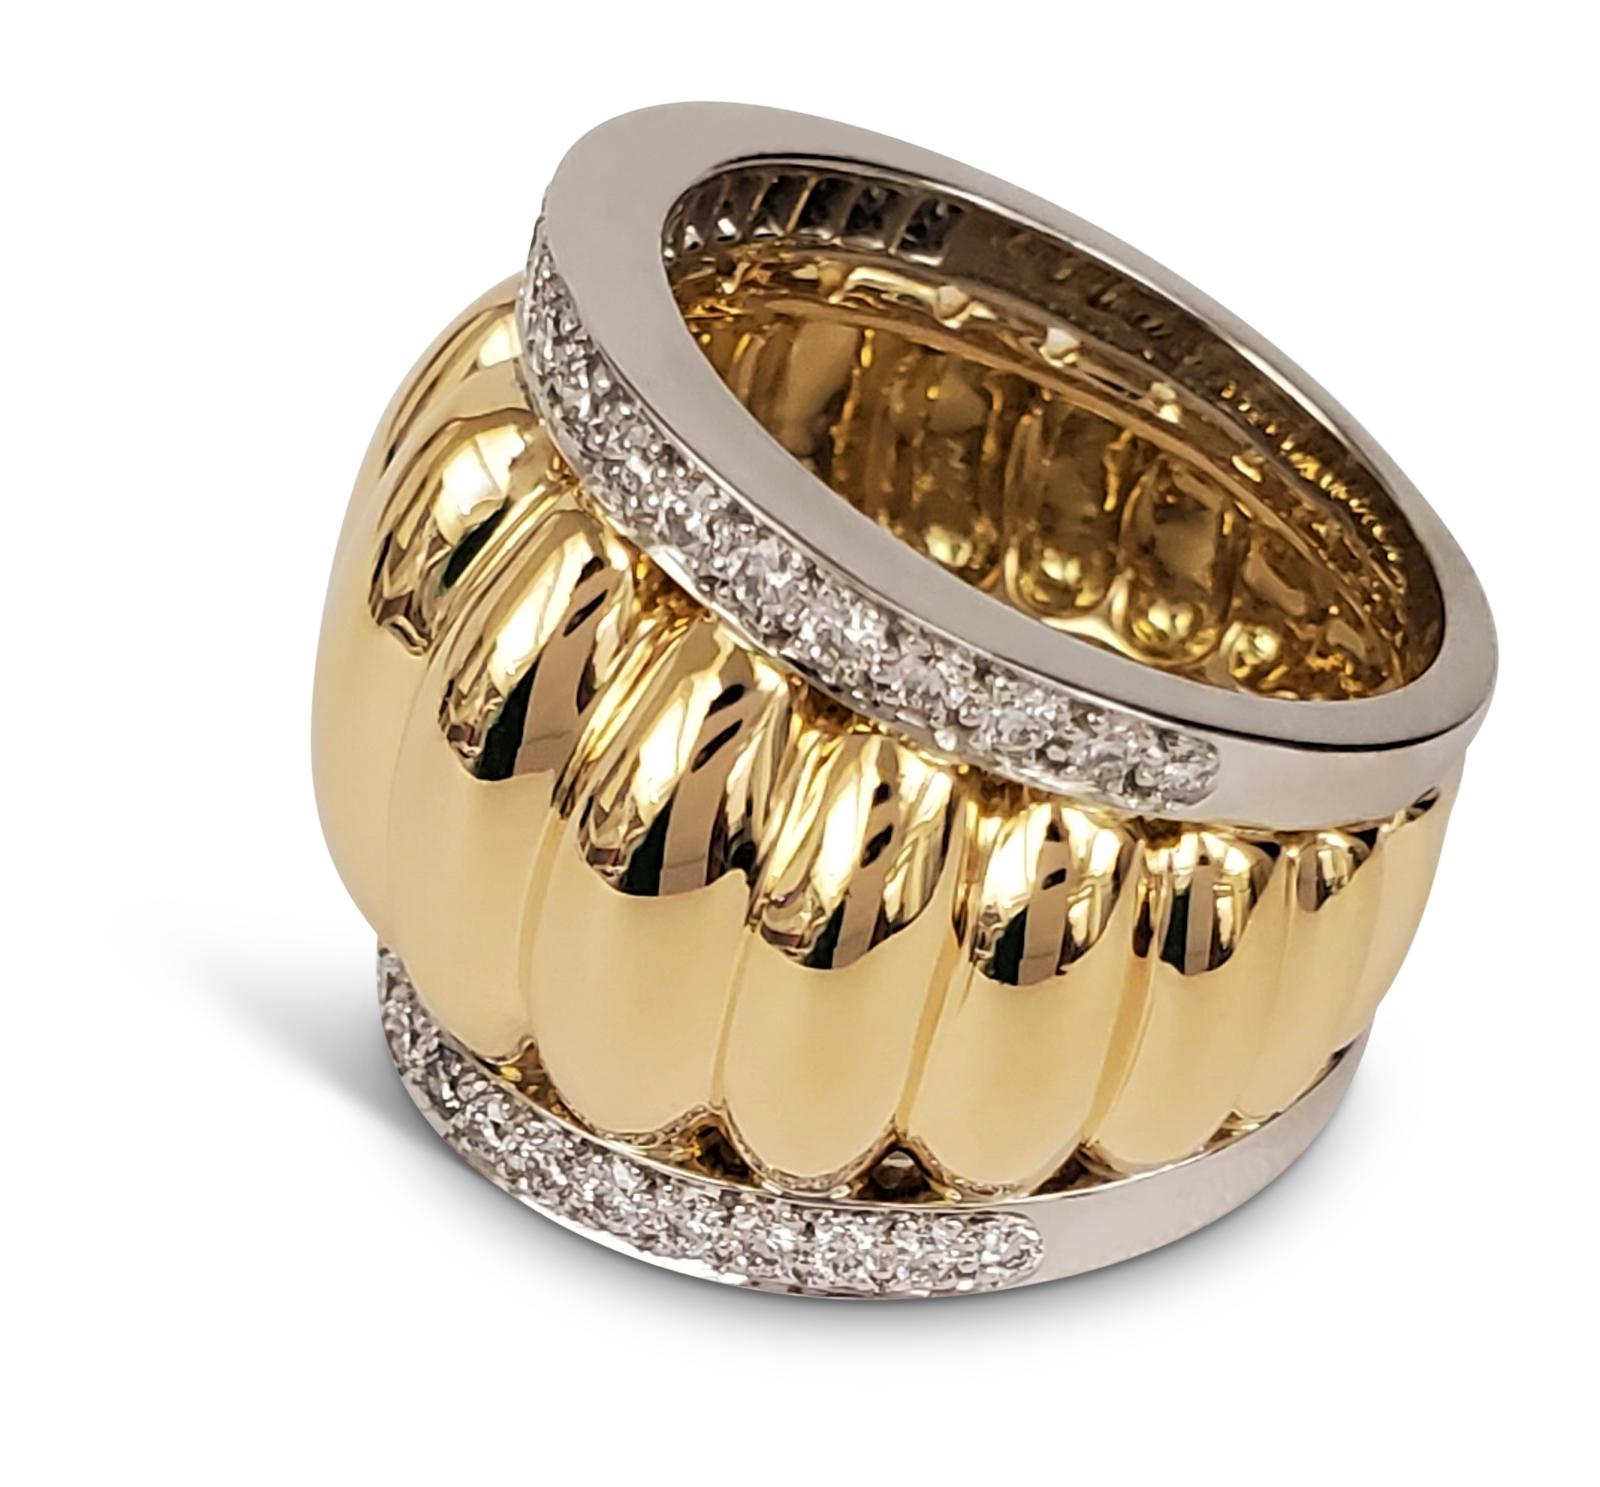 The Belperron collection was created from original archives of paintings and designs, all of which embody the spirit of Belperron’s aesthetic. The ring is crafted in 18 karat fluted yellow gold along with platinum set with an estimated 1.20 carats